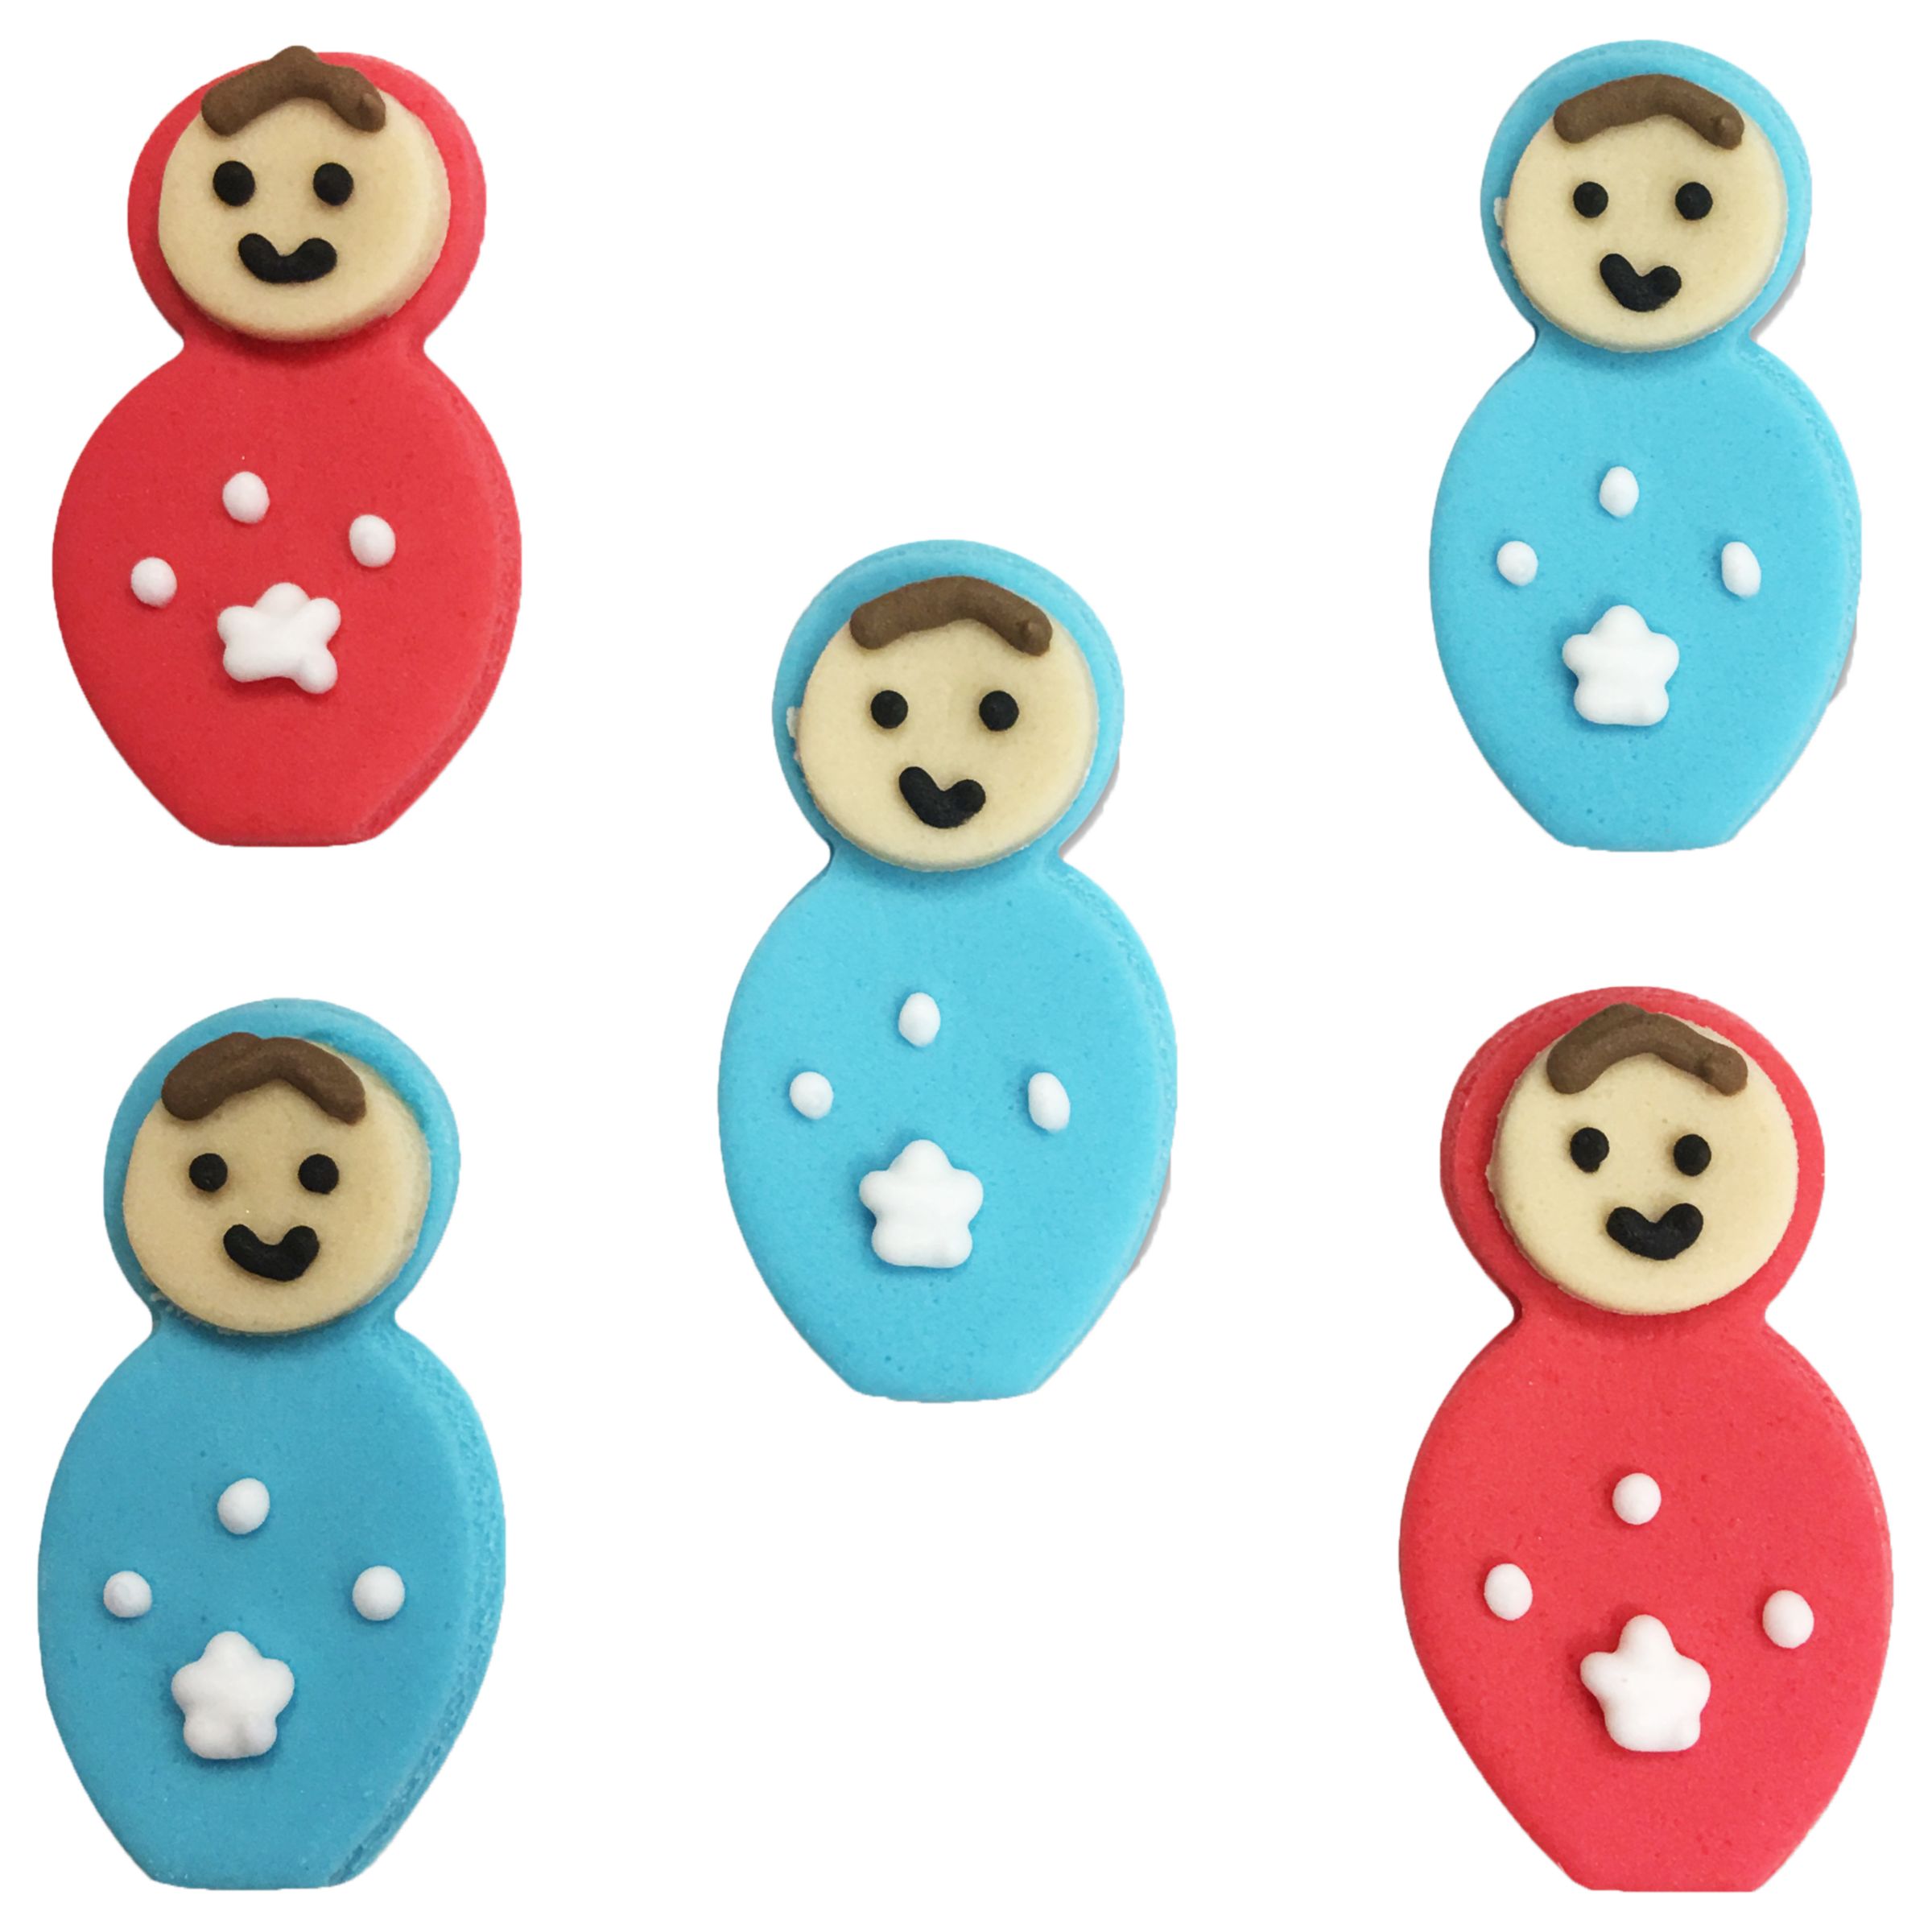 Creative Party Sugarcraft Russian Christmas Cake Toppers, Pack of 5